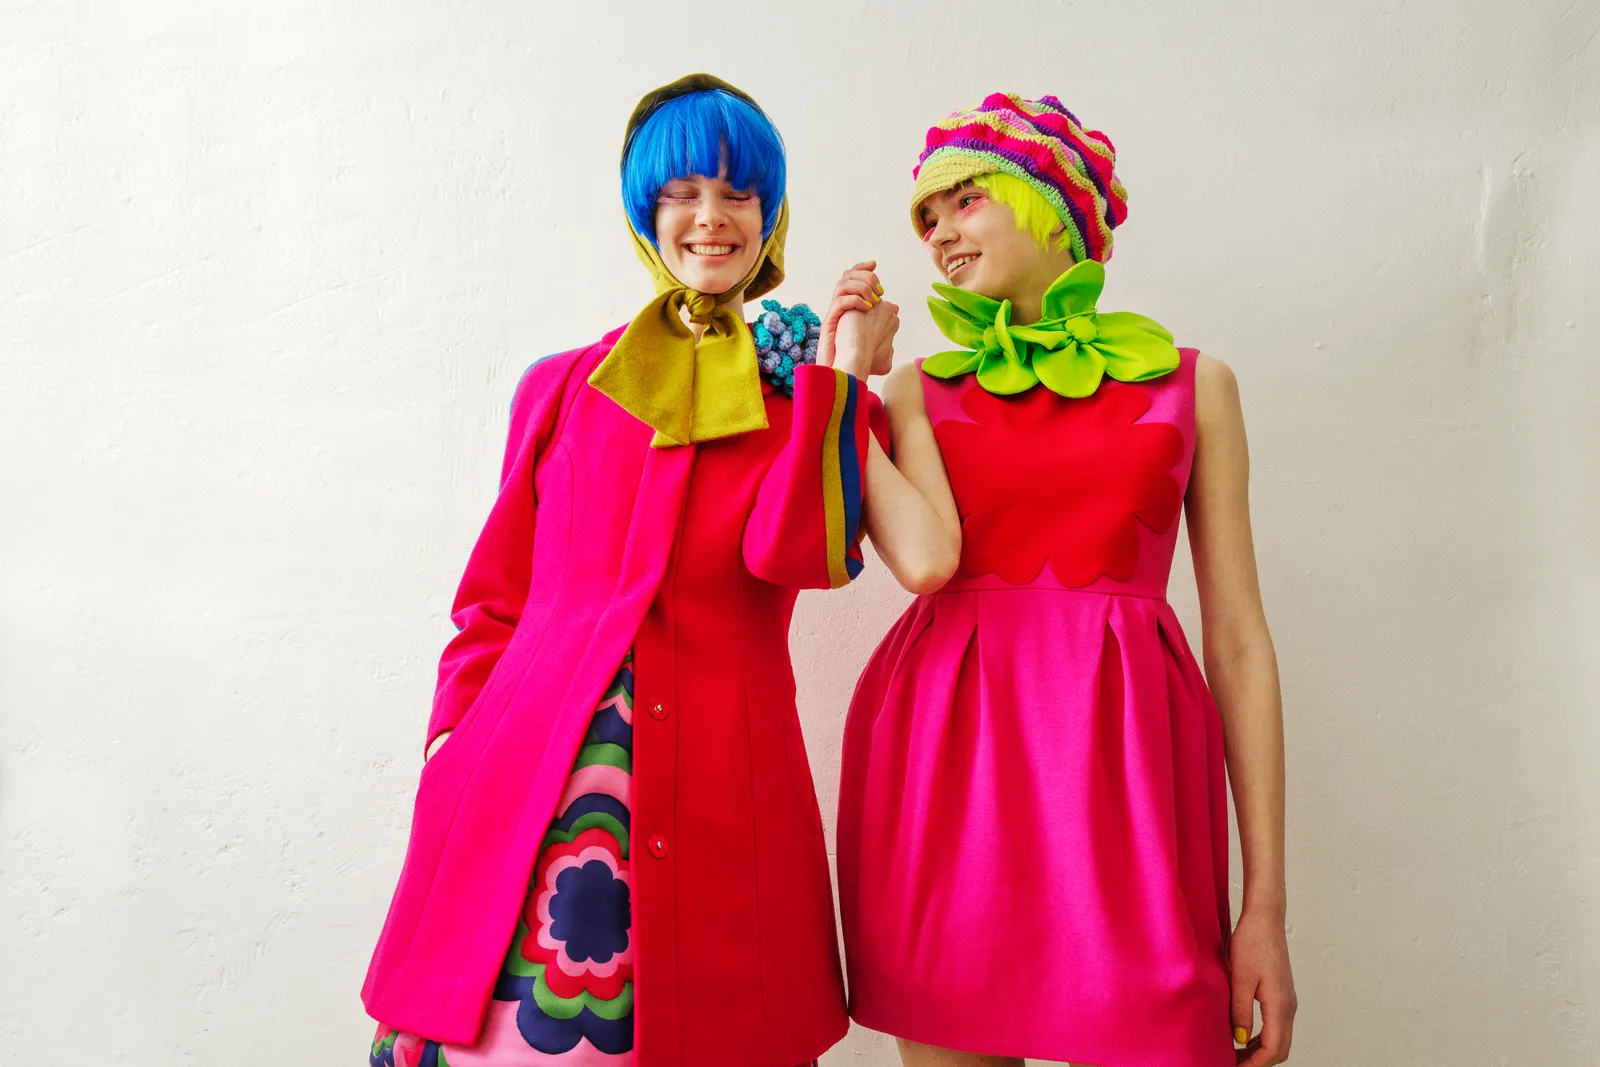 Celine Kwan’s Energetic Clothes Aim to Make You Smile